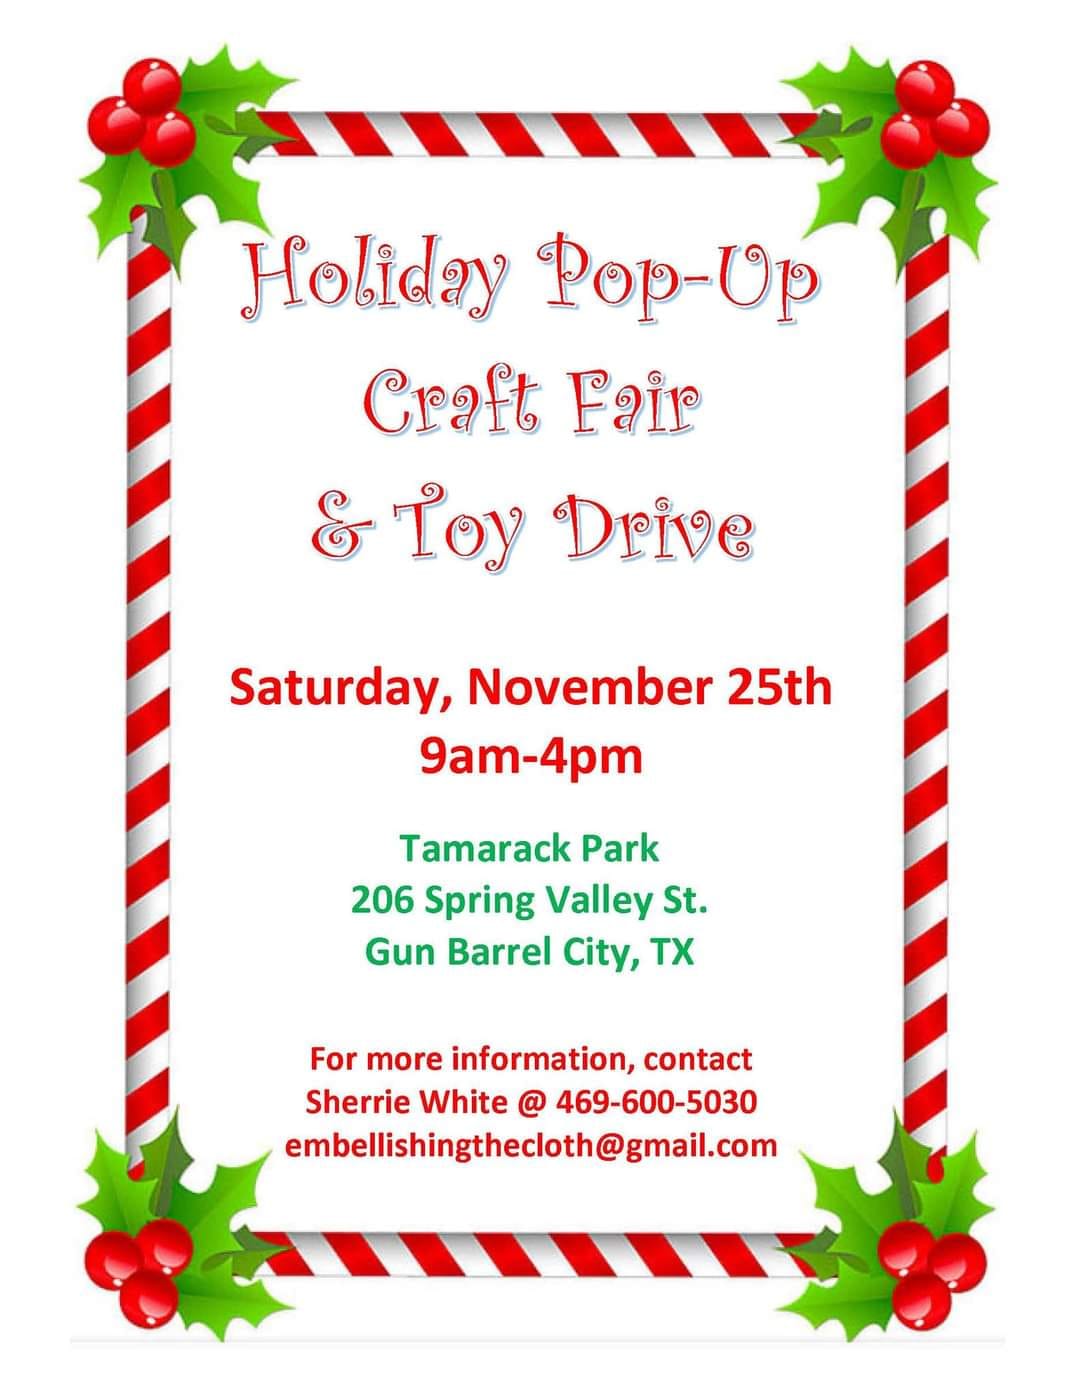 Holiday Pop-Up Craft Fair and Toy Drive 1 Holiday popup cedarcreeklake.online